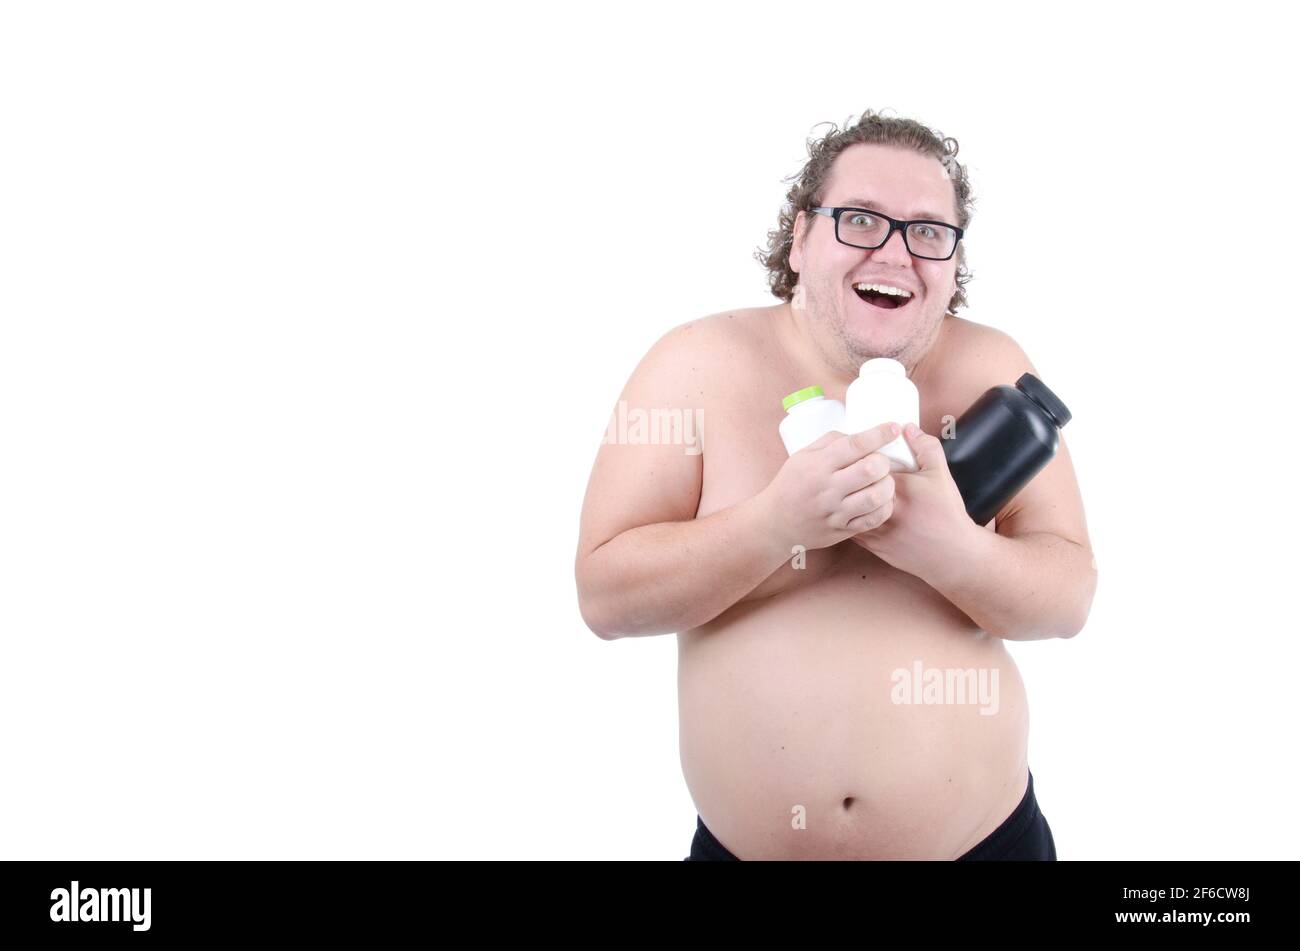 Funny fat guy. Fitness and healthy lifestyle. White background Stock Photo  - Alamy